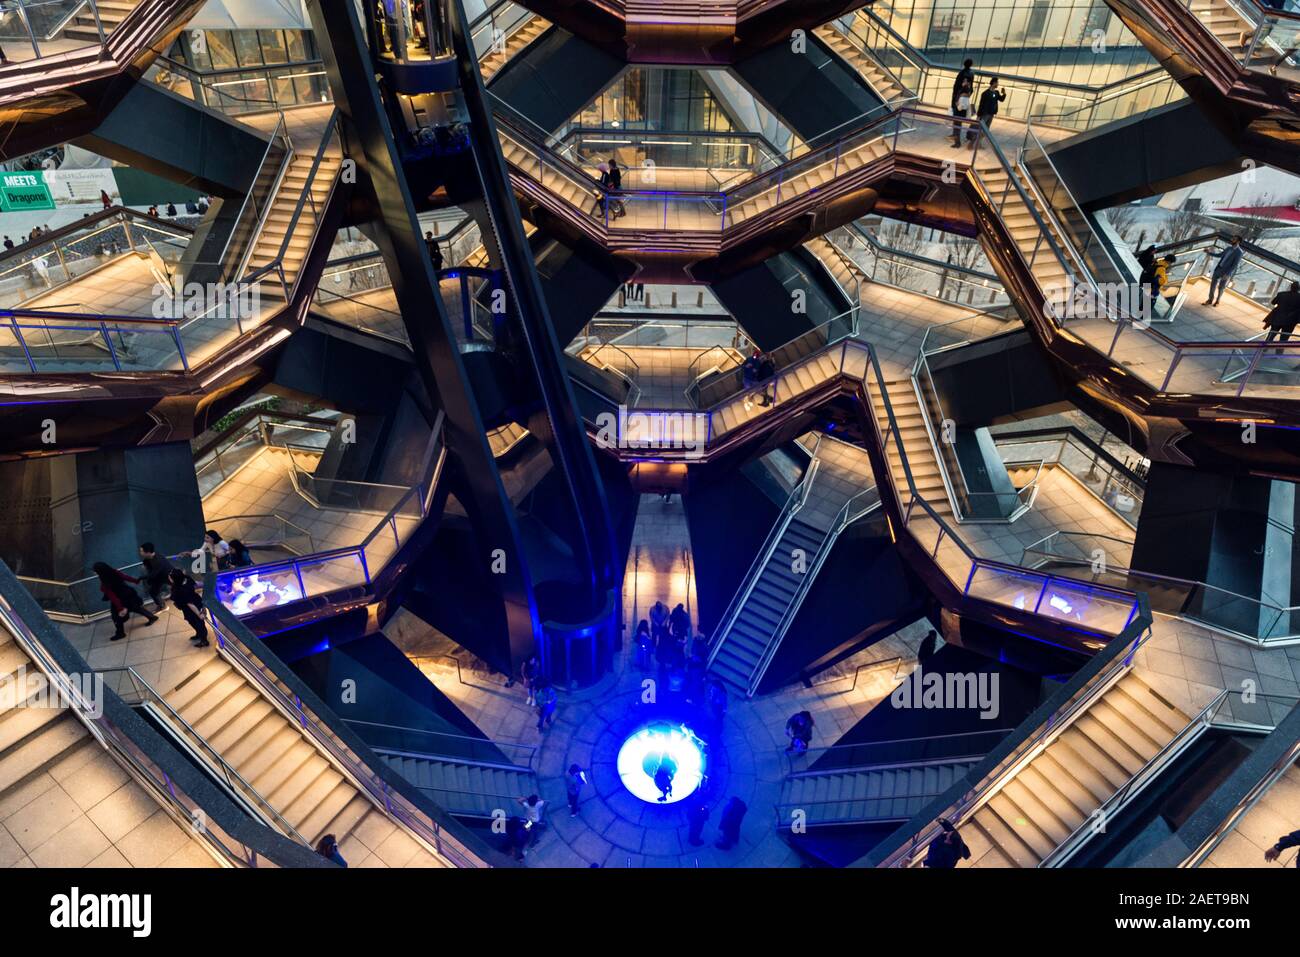 New York, NY - March 15 2019: Inside of the vessel in the hudson yards during the evening Stock Photo